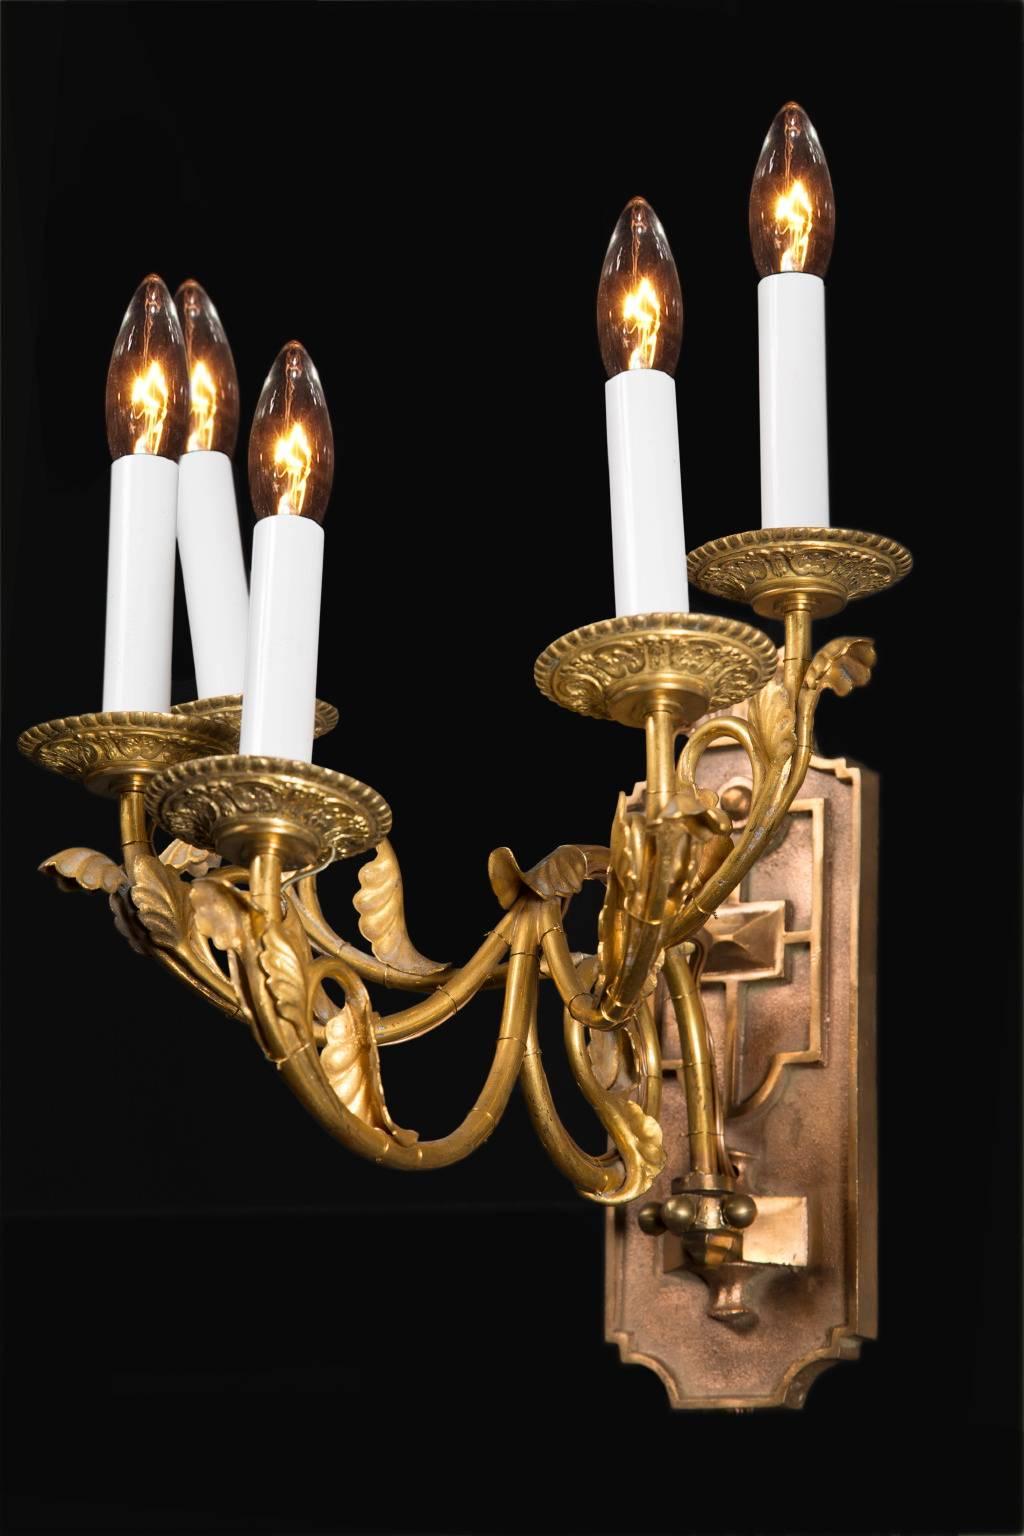 An unusual pair of French sconces, these were made in the early 20th century. Made of bronze, they are Louis XVI style, with five light on each sconce. A heavy backplate is decorated with a geometric pattern and elaborate bronze bobeches sit on the